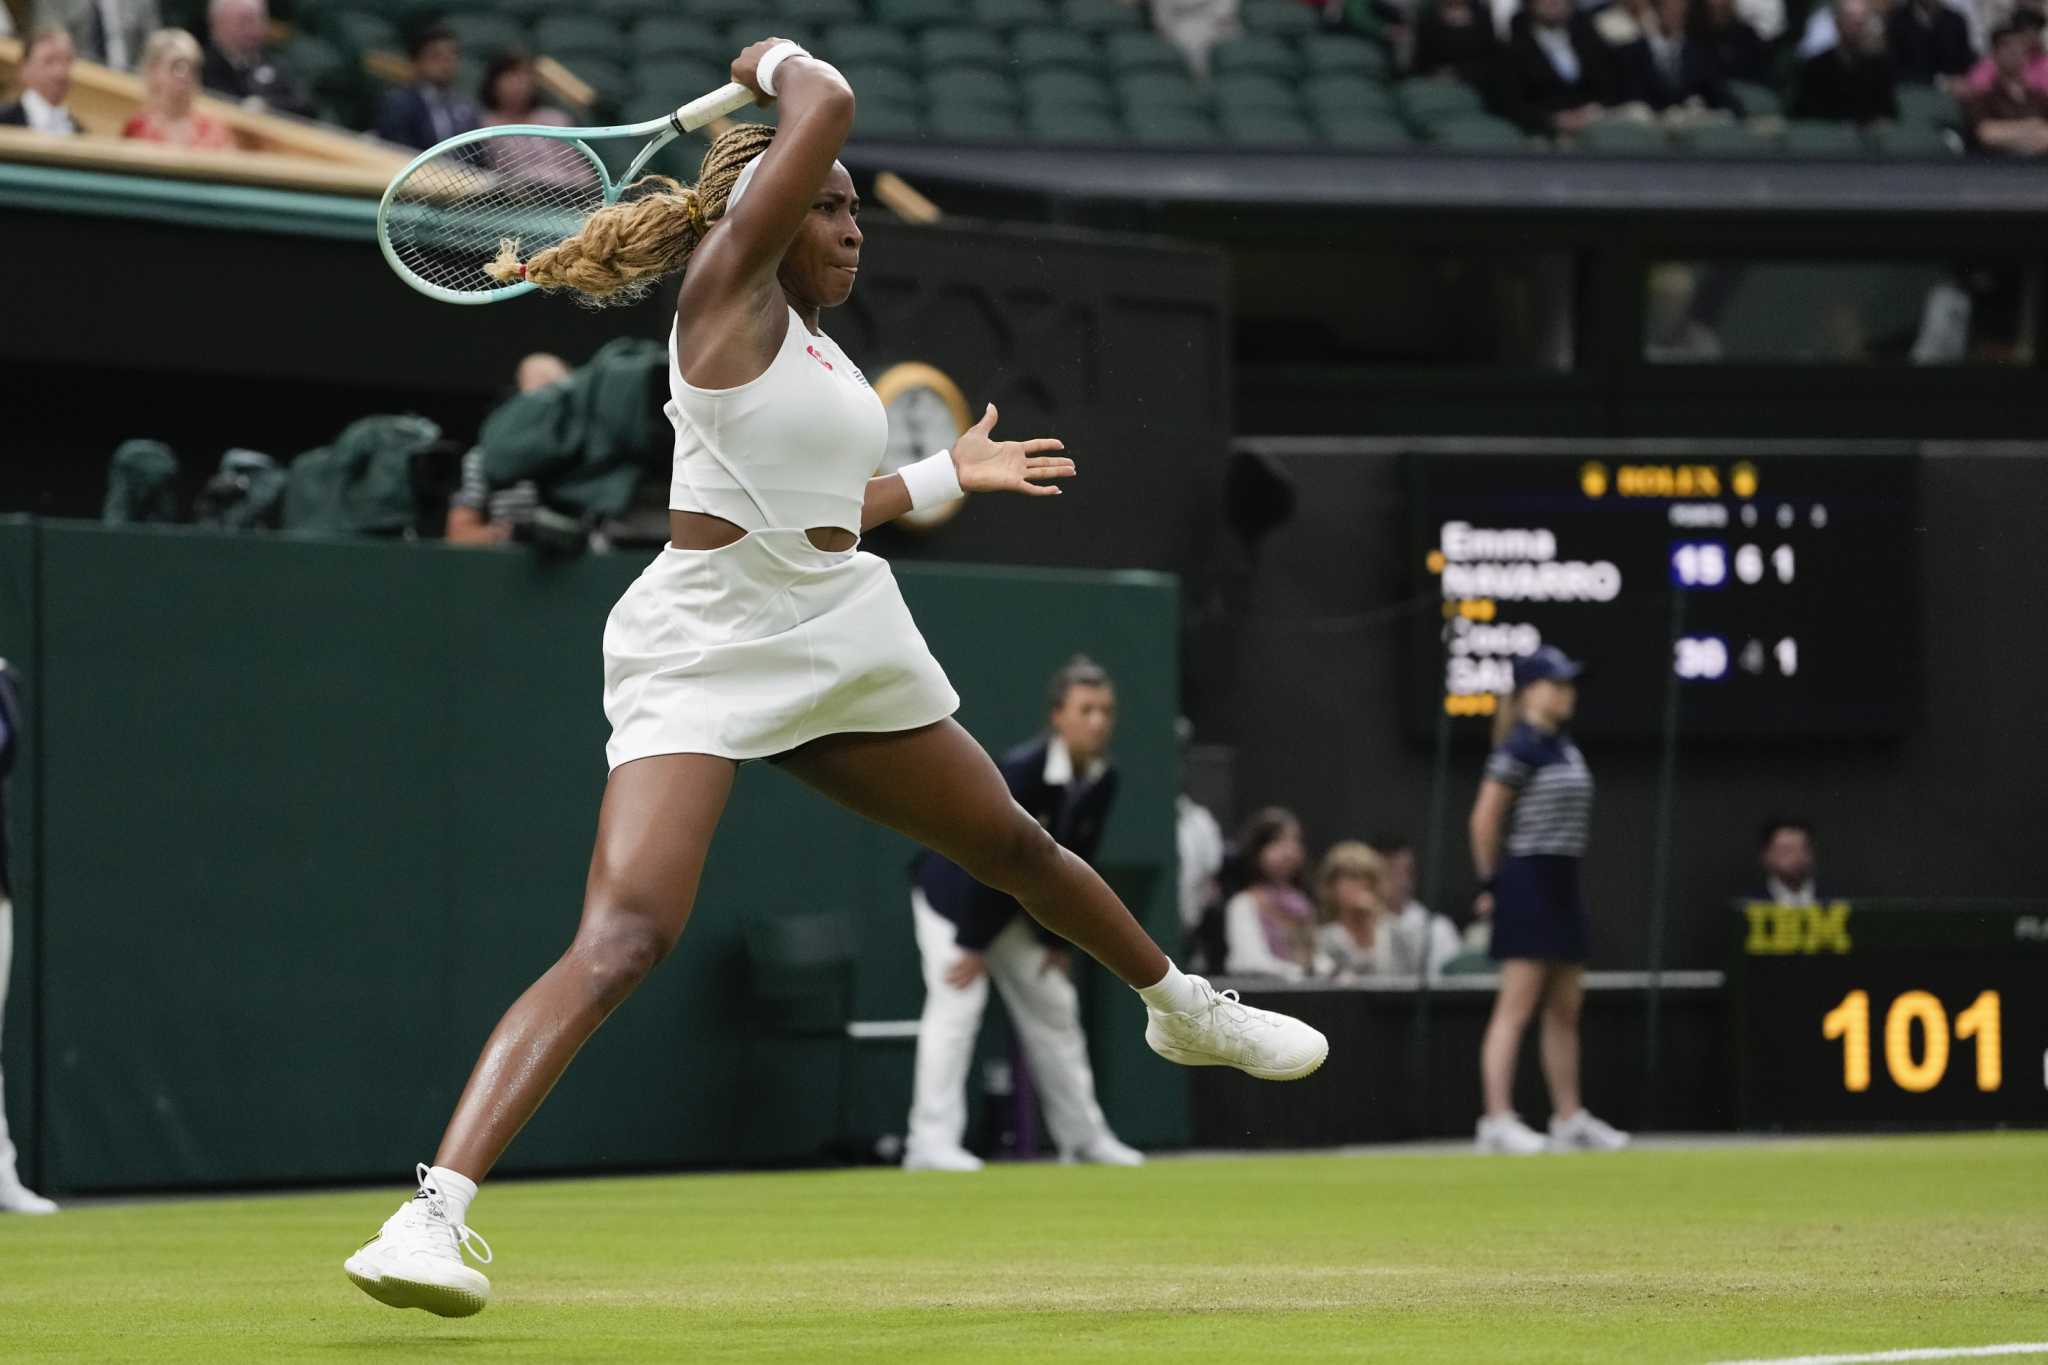 Coco Gauff can't get a new game plan at Wimbledon and loses to Emma Navarro